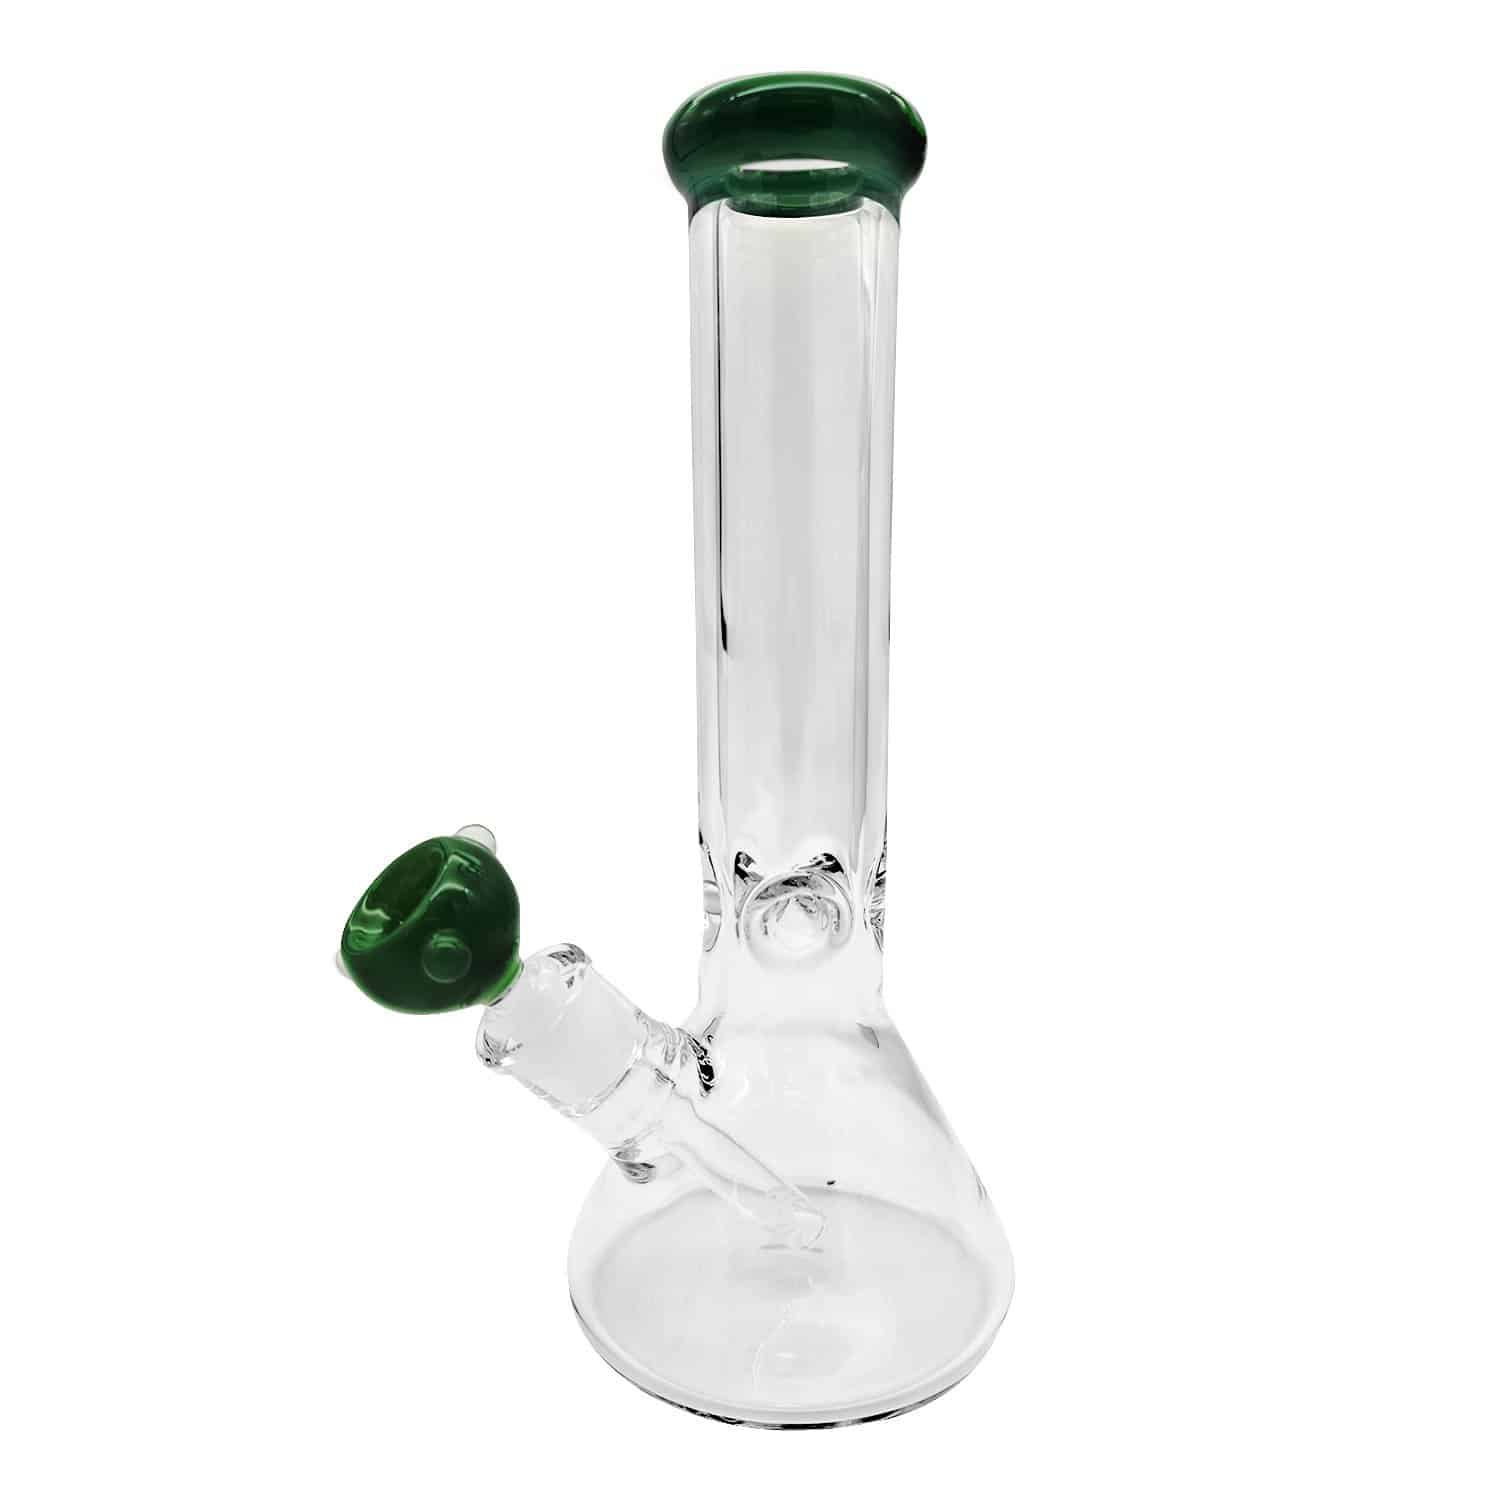 Glass Bong with Ice Catcher - Green